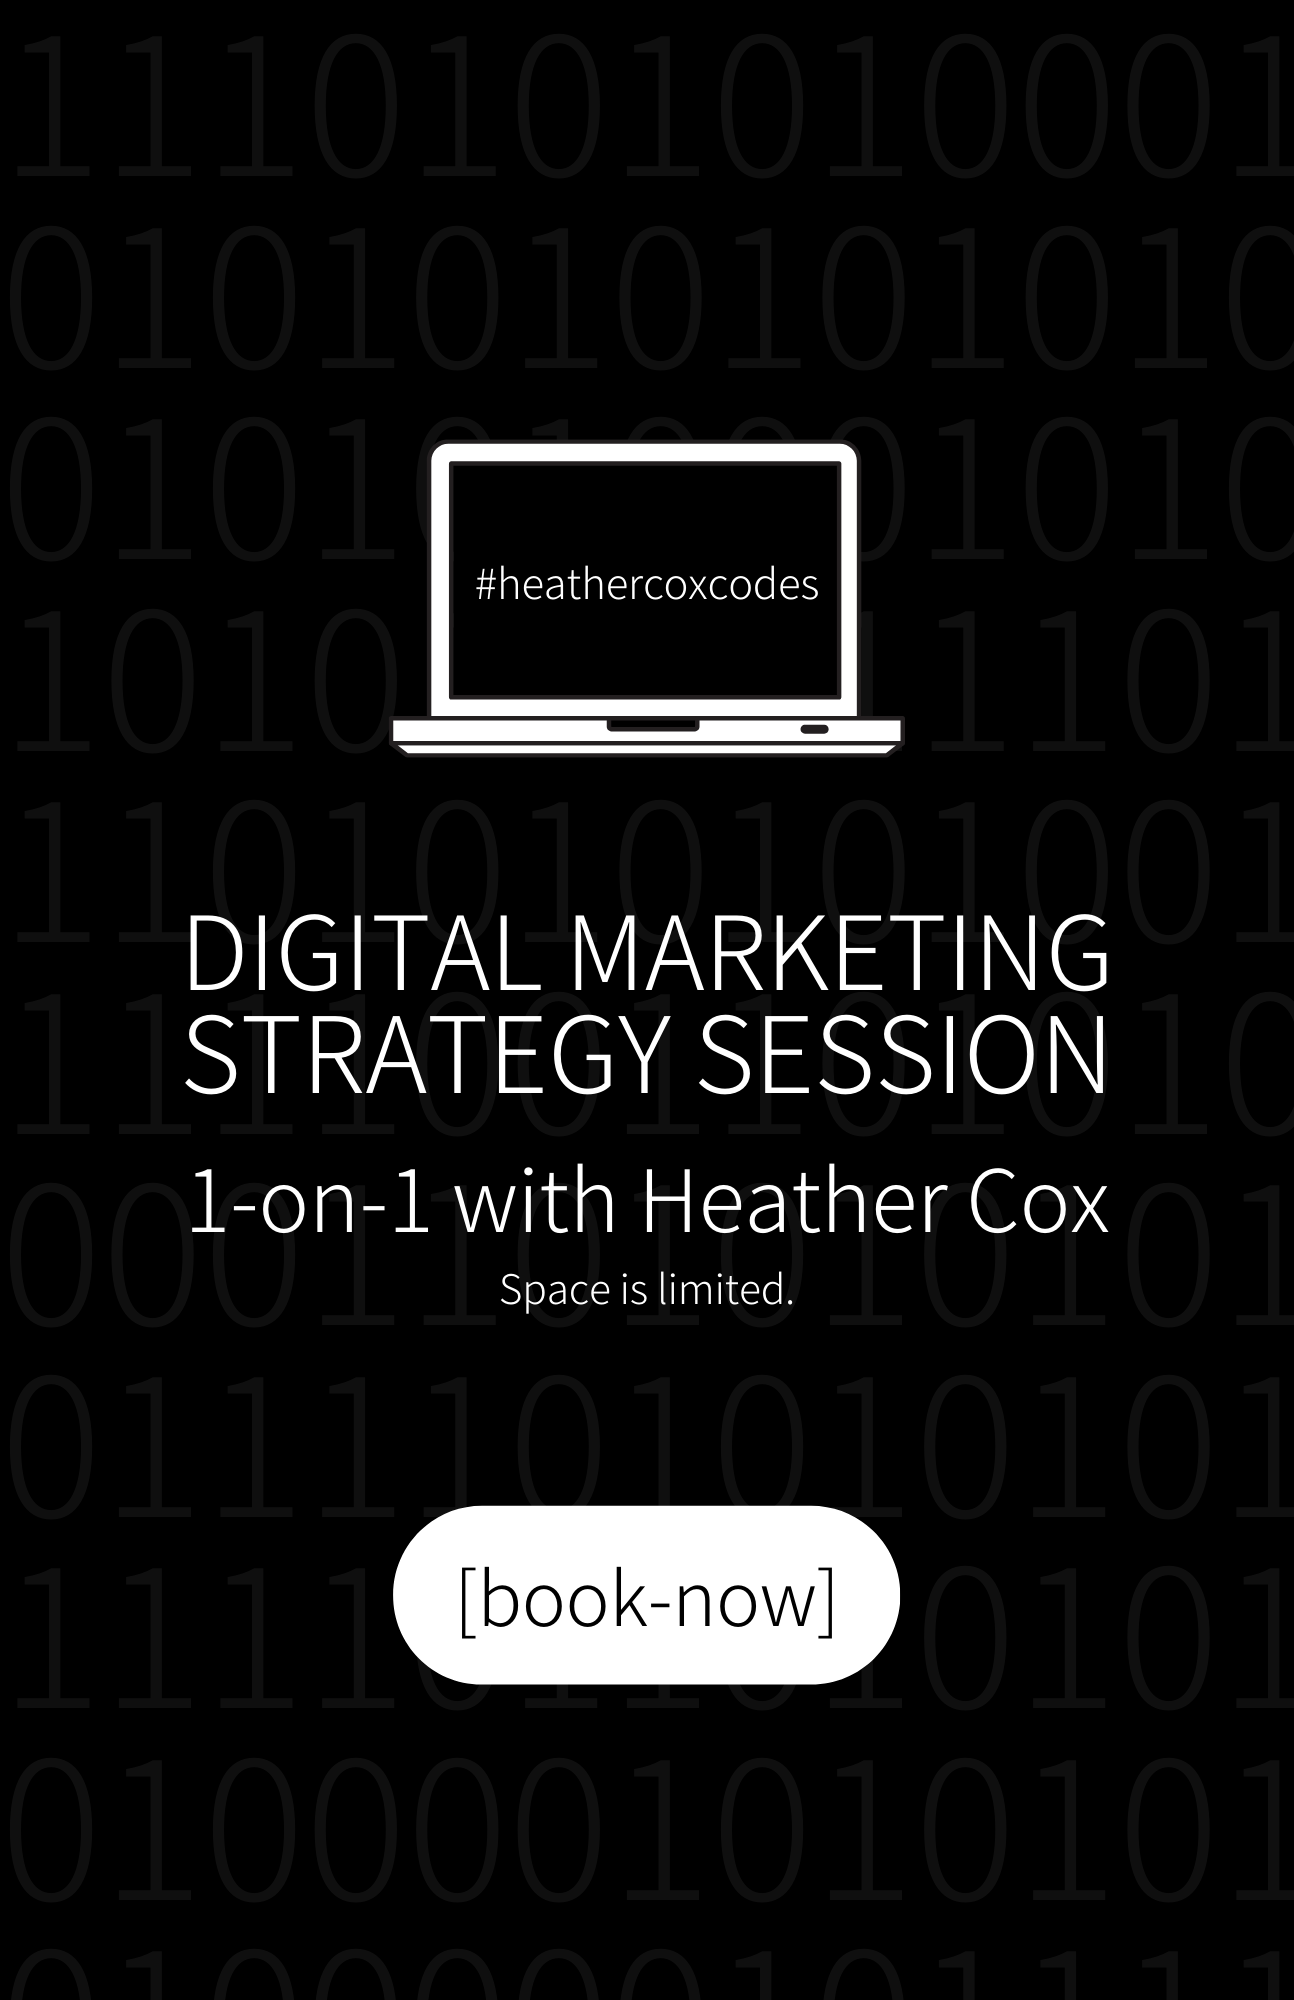 digital marketing strategy session with heather cox